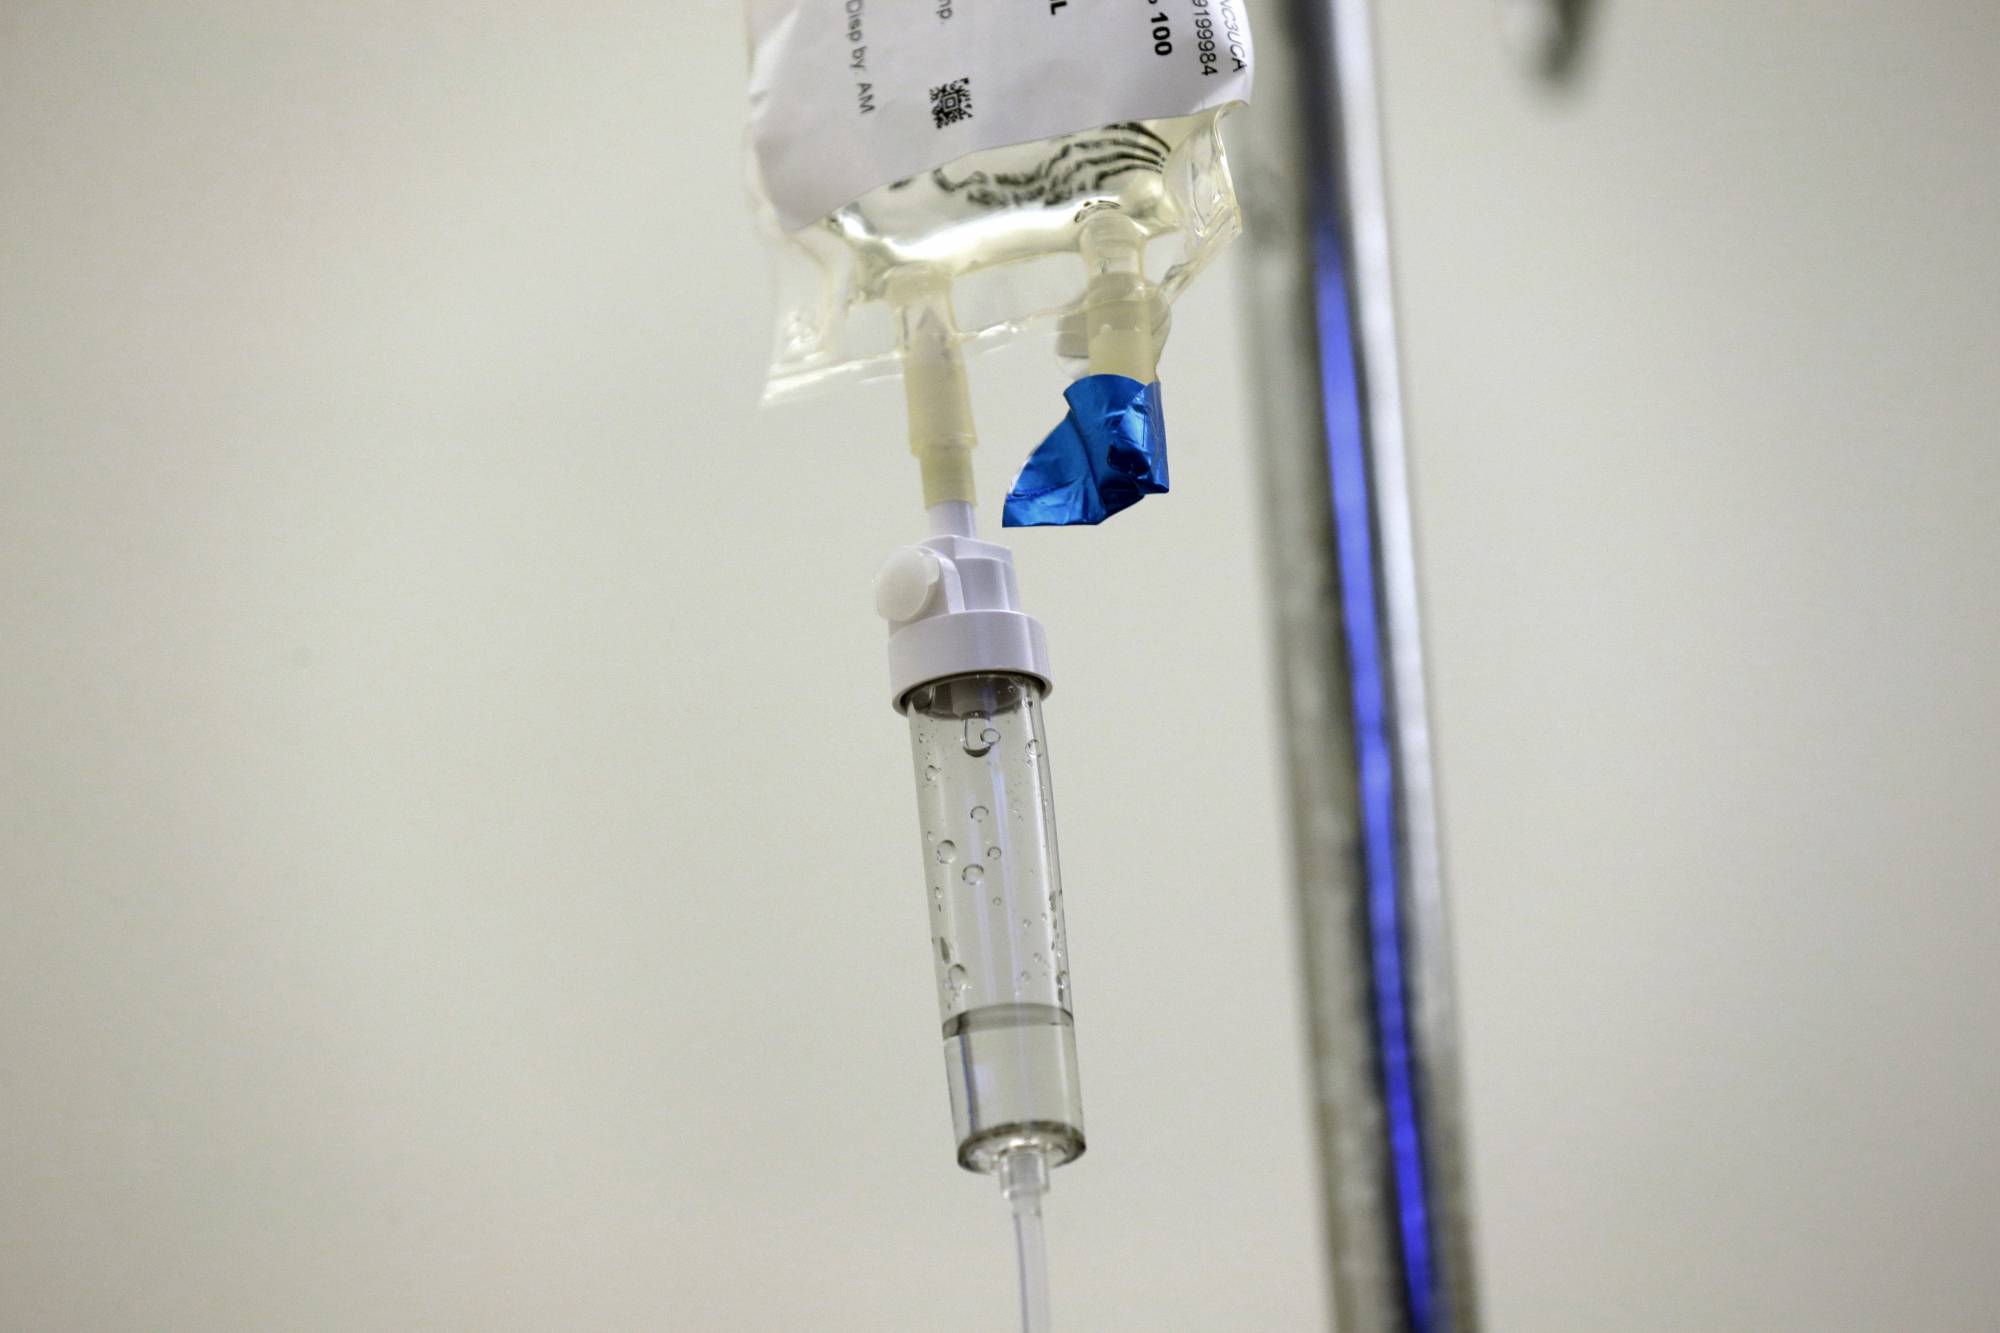 Chemotherapy drugs are administered to a patient at North Carolina Cancer Hospital in Chapel Hill, N.C., on Thursday, May 25, 2017. According to new studies released at a June 2017 American Society of Clinical Oncology conference, drugs are scoring big gains against some of the most common cancers, setting new standards of care for many prostate, breast and lung tumors. (AP Photo/Gerry Broome)